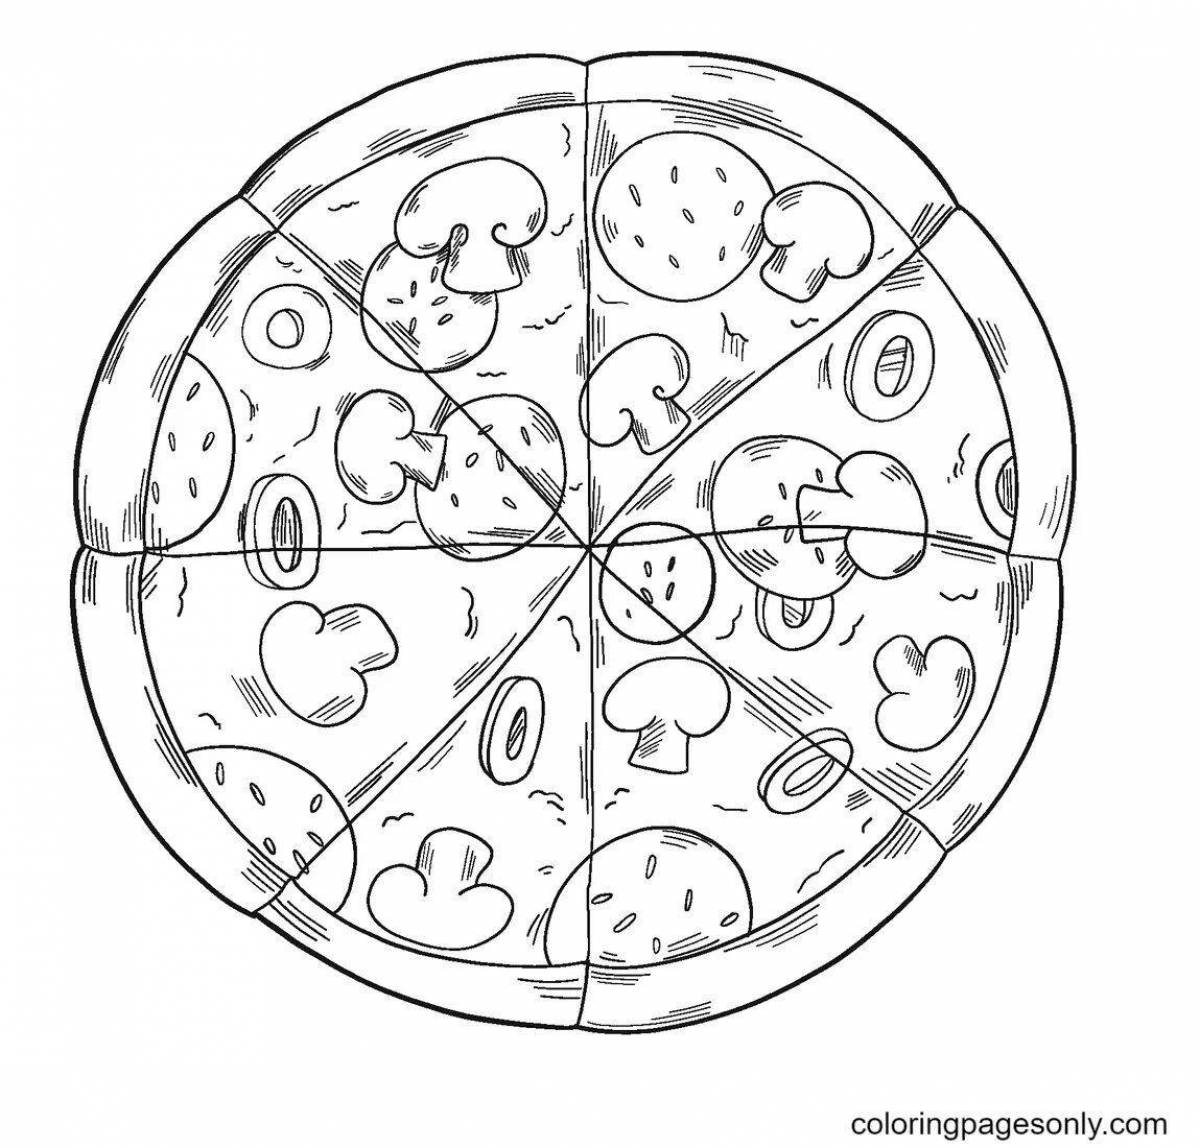 Drawing of delicious pizza